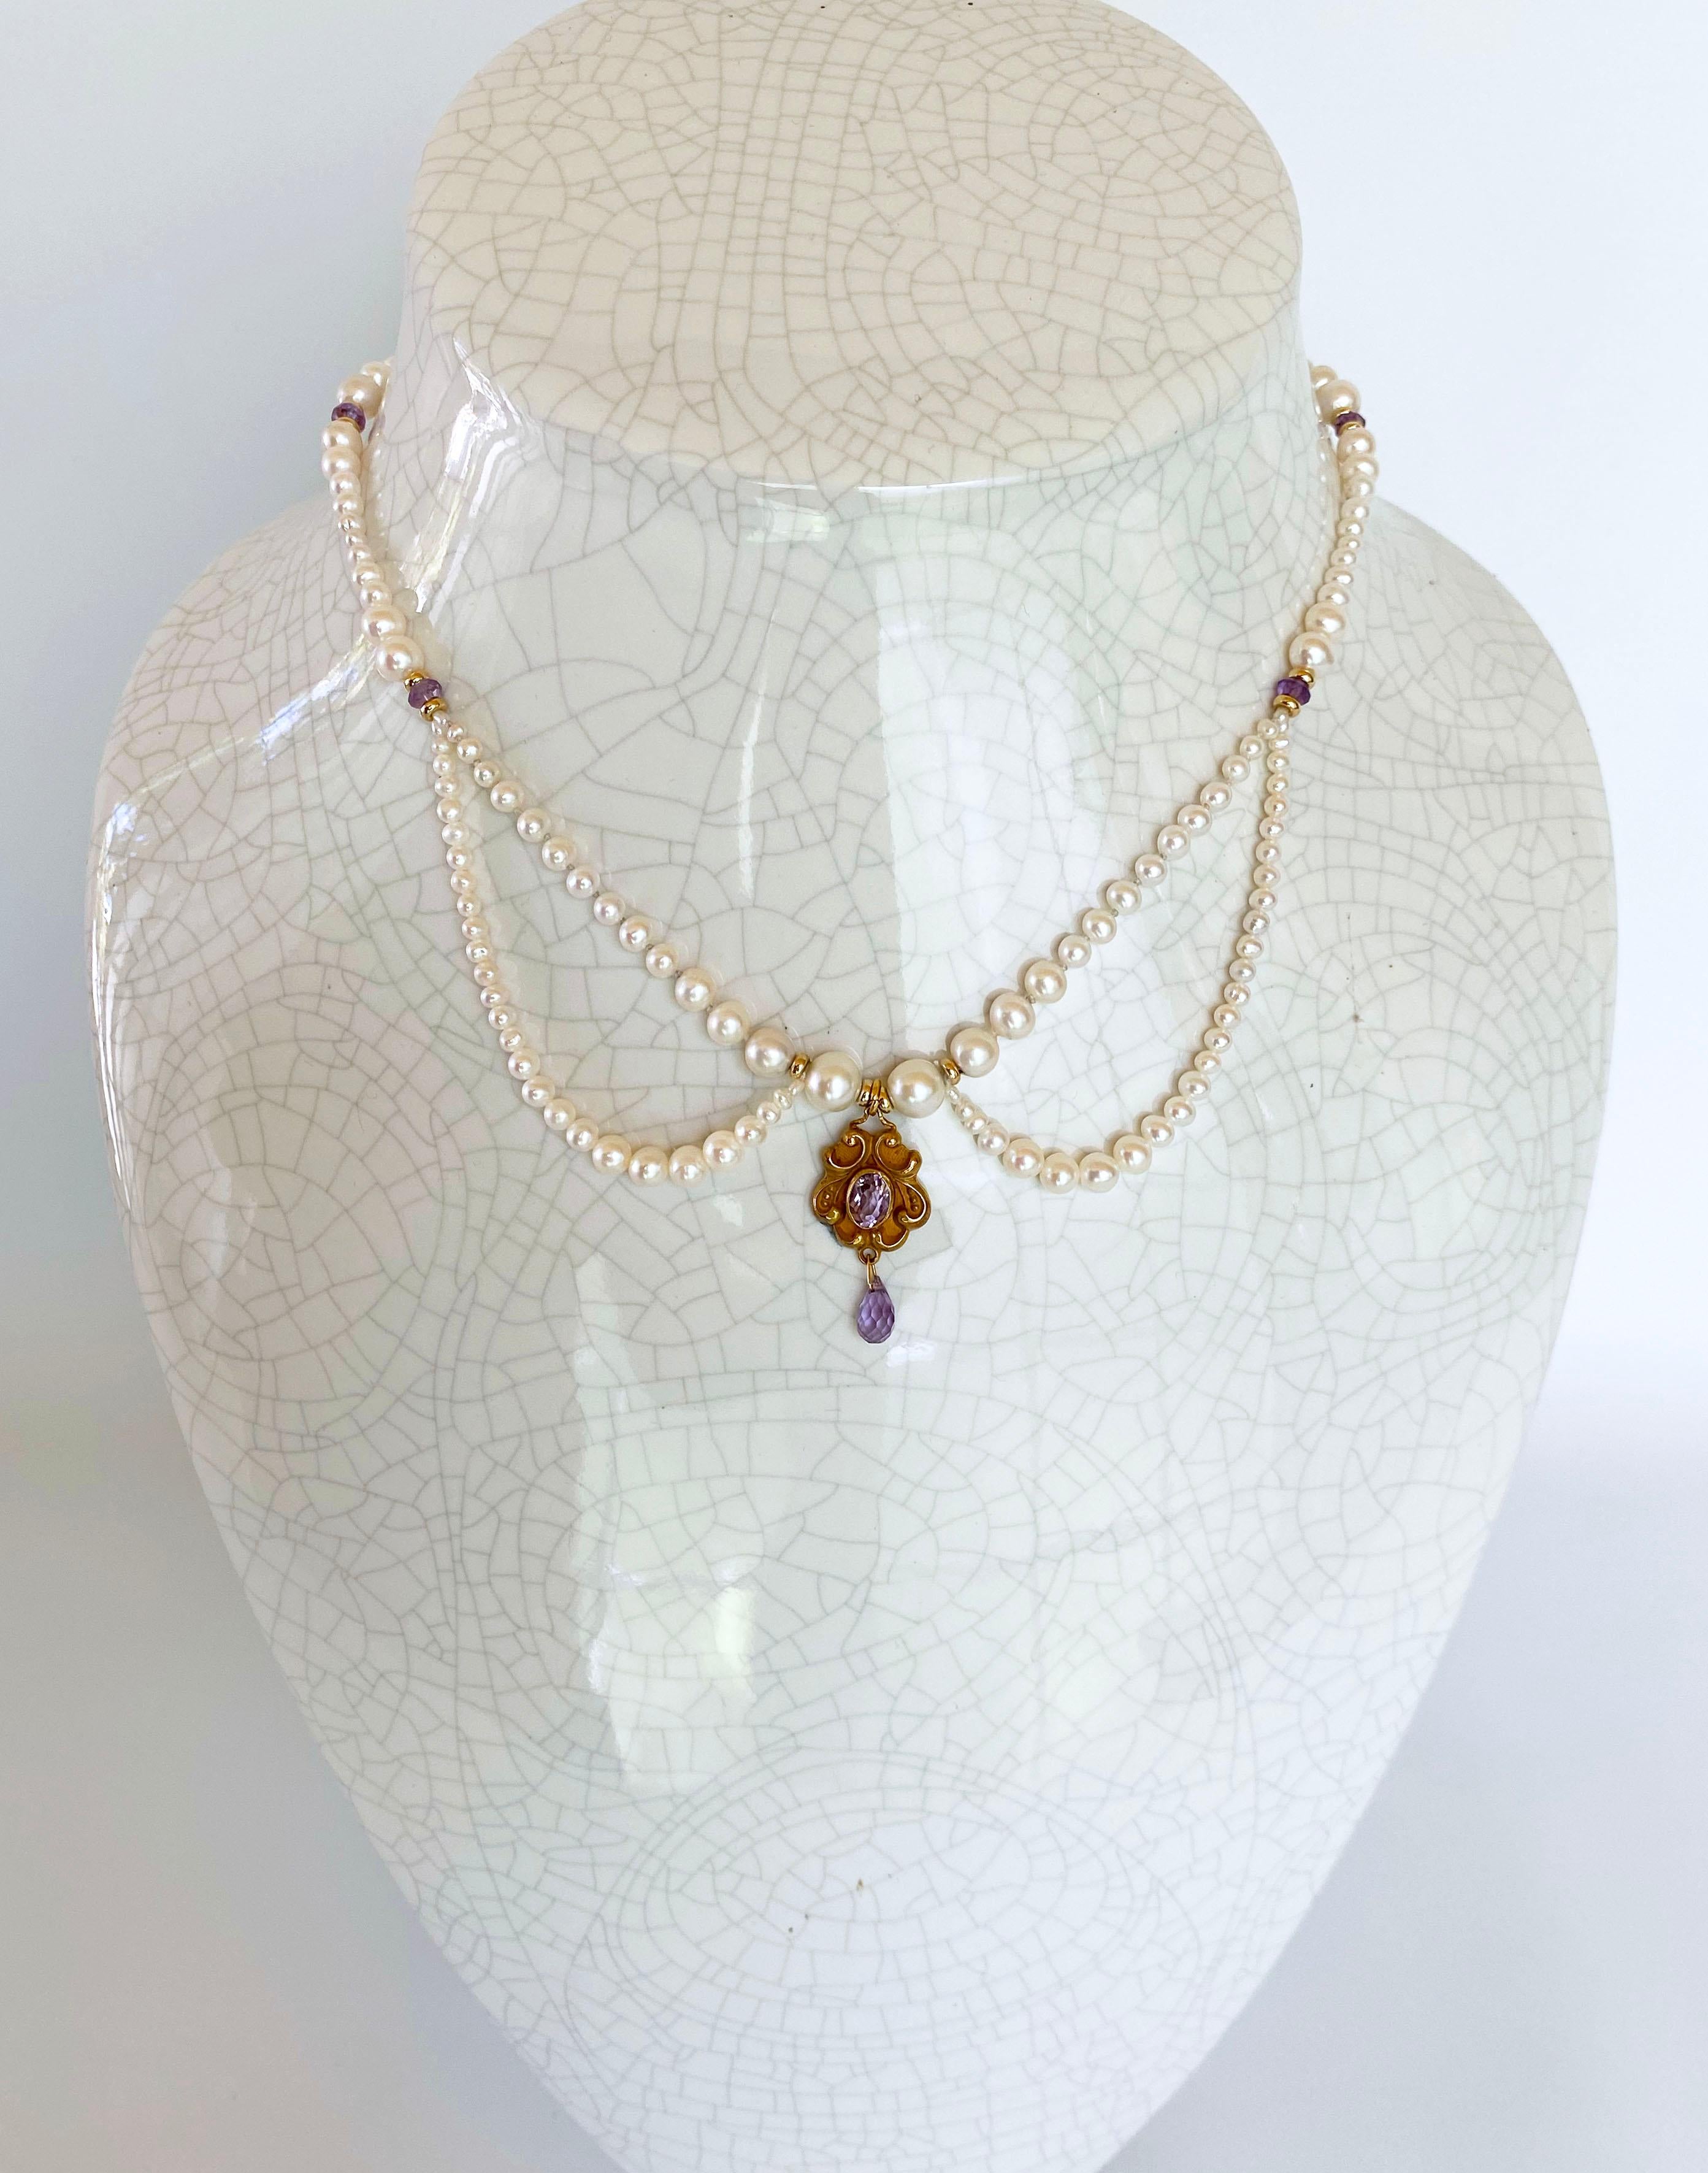 Beautiful Marina J. Graduated high luster Pearl Necklace featuring Amethyst and solid 14K Yellow Gold accents, with Graduated Drapes. This Victorian inspired necklace is a perfect piece to show off the neck, as the Draped Pearls accent any collar